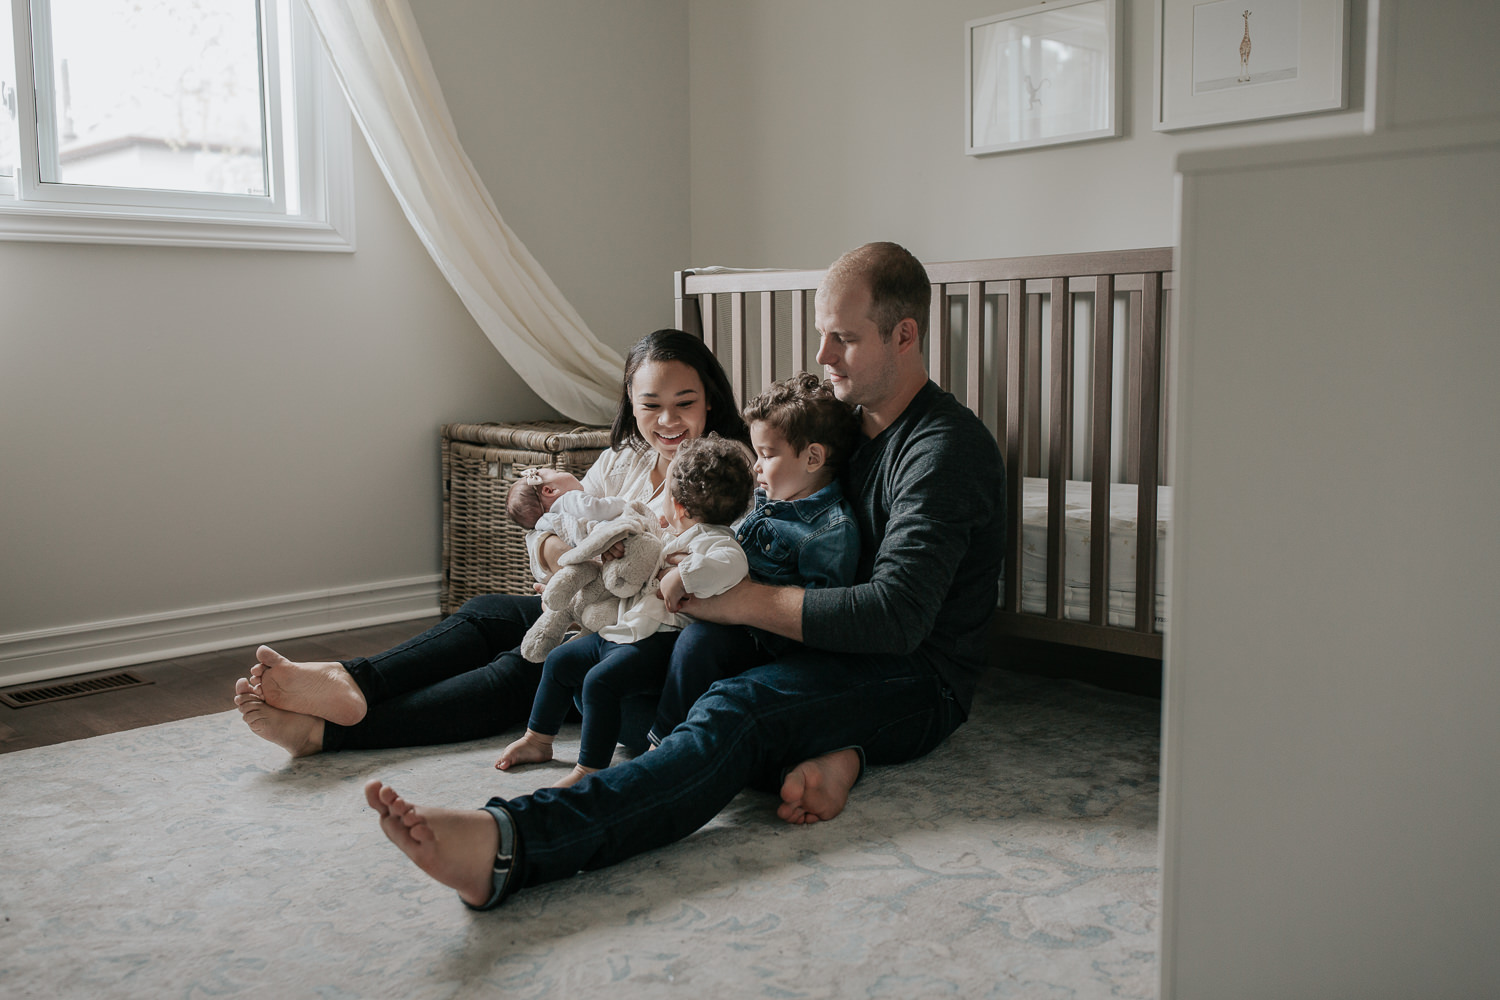 family of 5 sitting on floor of nursery leaning against crib, mom holding 2 week old baby girl, dad snuggling 2 year old boy and 1 year old daughter in his lap - Markham Lifestyle Photos